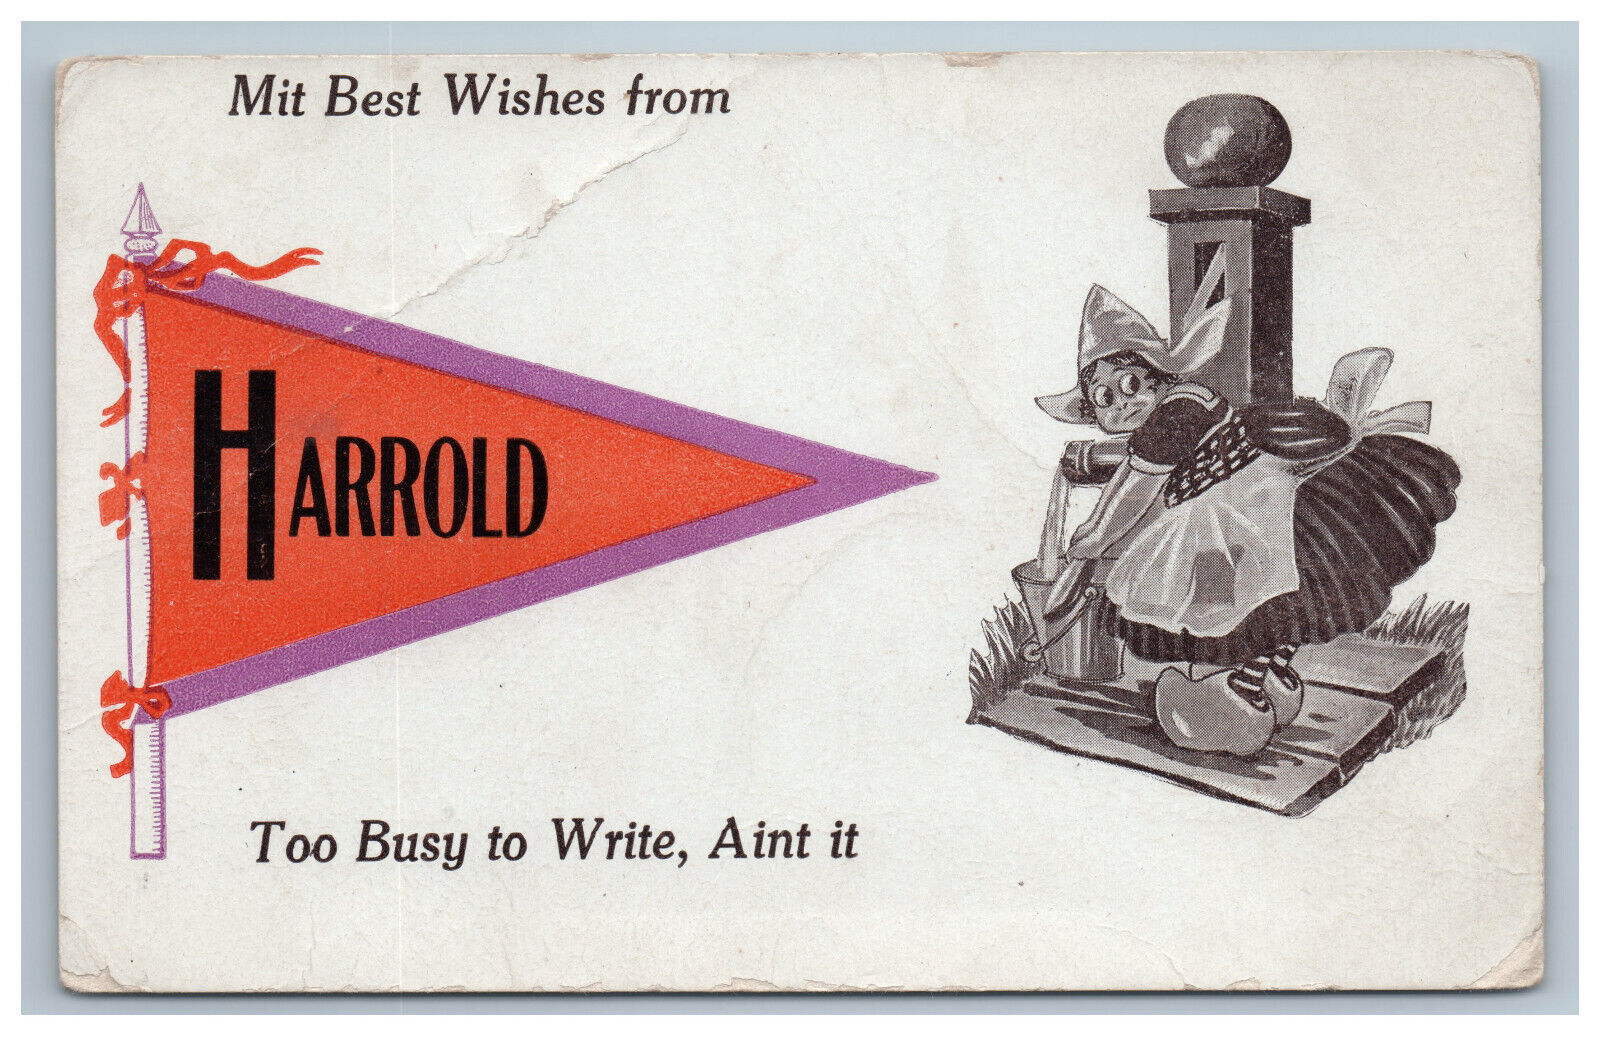 1912 Harrold SD Pennant Postcard Mit Best Wishes from Dutch Girl Water Well Pump